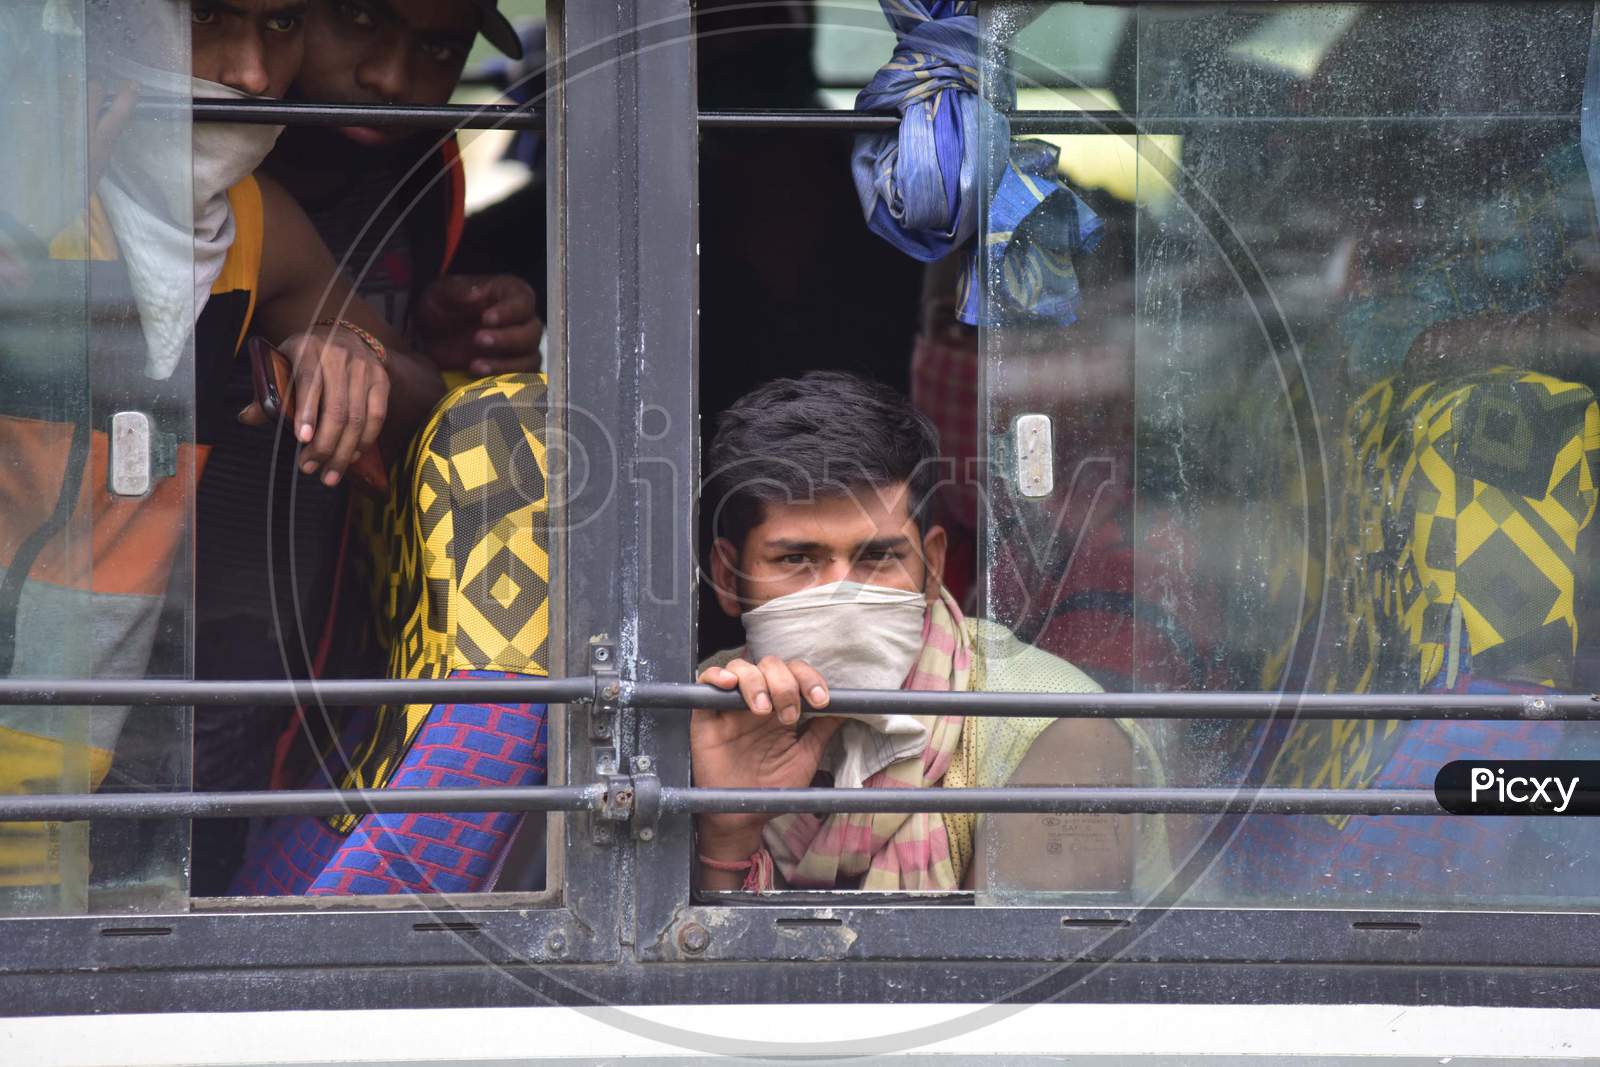 Migrants Arriving From Kerela  Via Train Boarding  A Bus For Quarantine Center   During Extended Nationwide Lockdown Amidst Coronavirus or COVID-19 Pandemic in Nagaon  on  may 24,2020